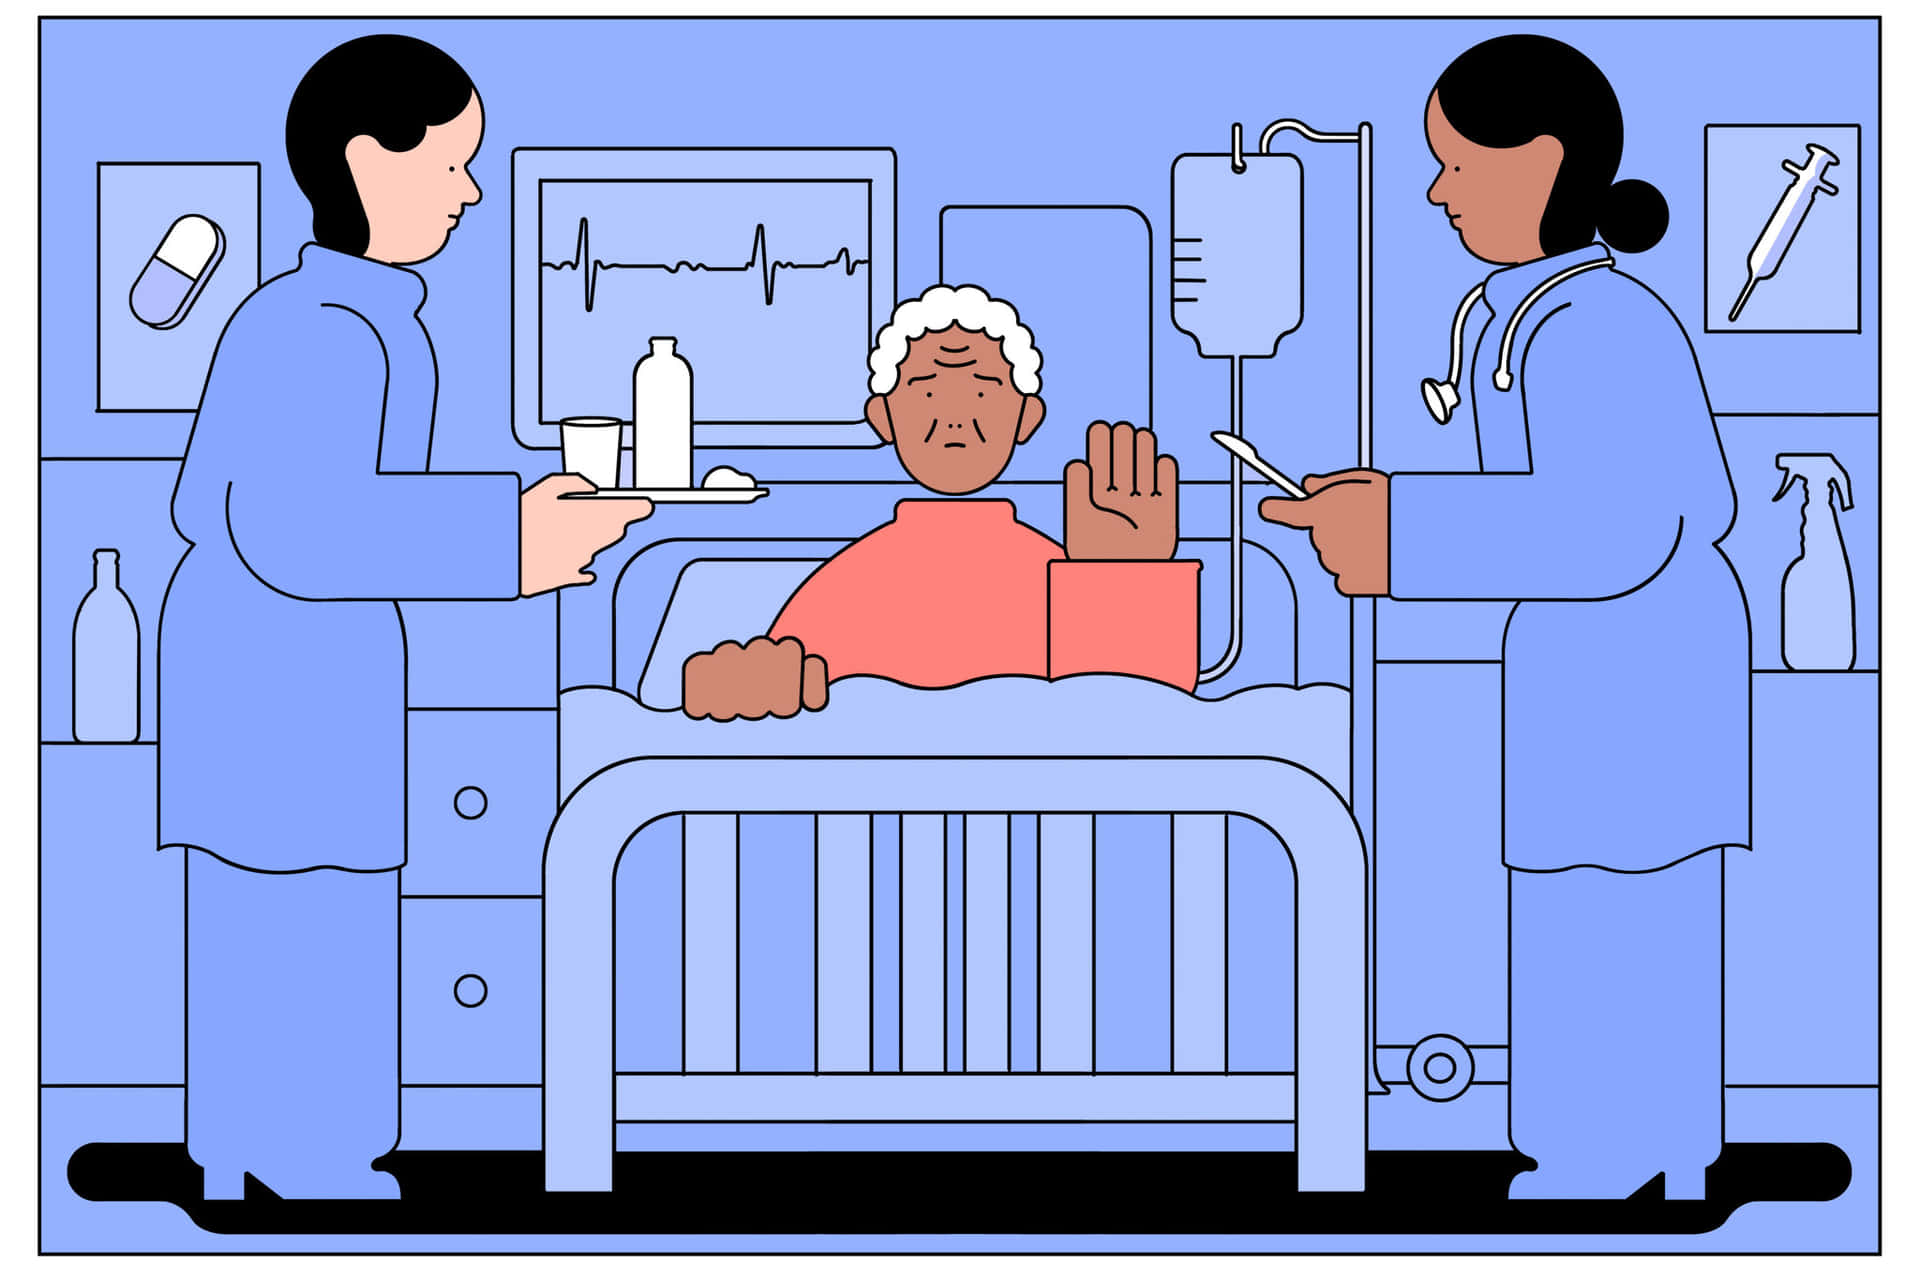 A Nurse Is Talking To An Elderly Patient In A Hospital Bed